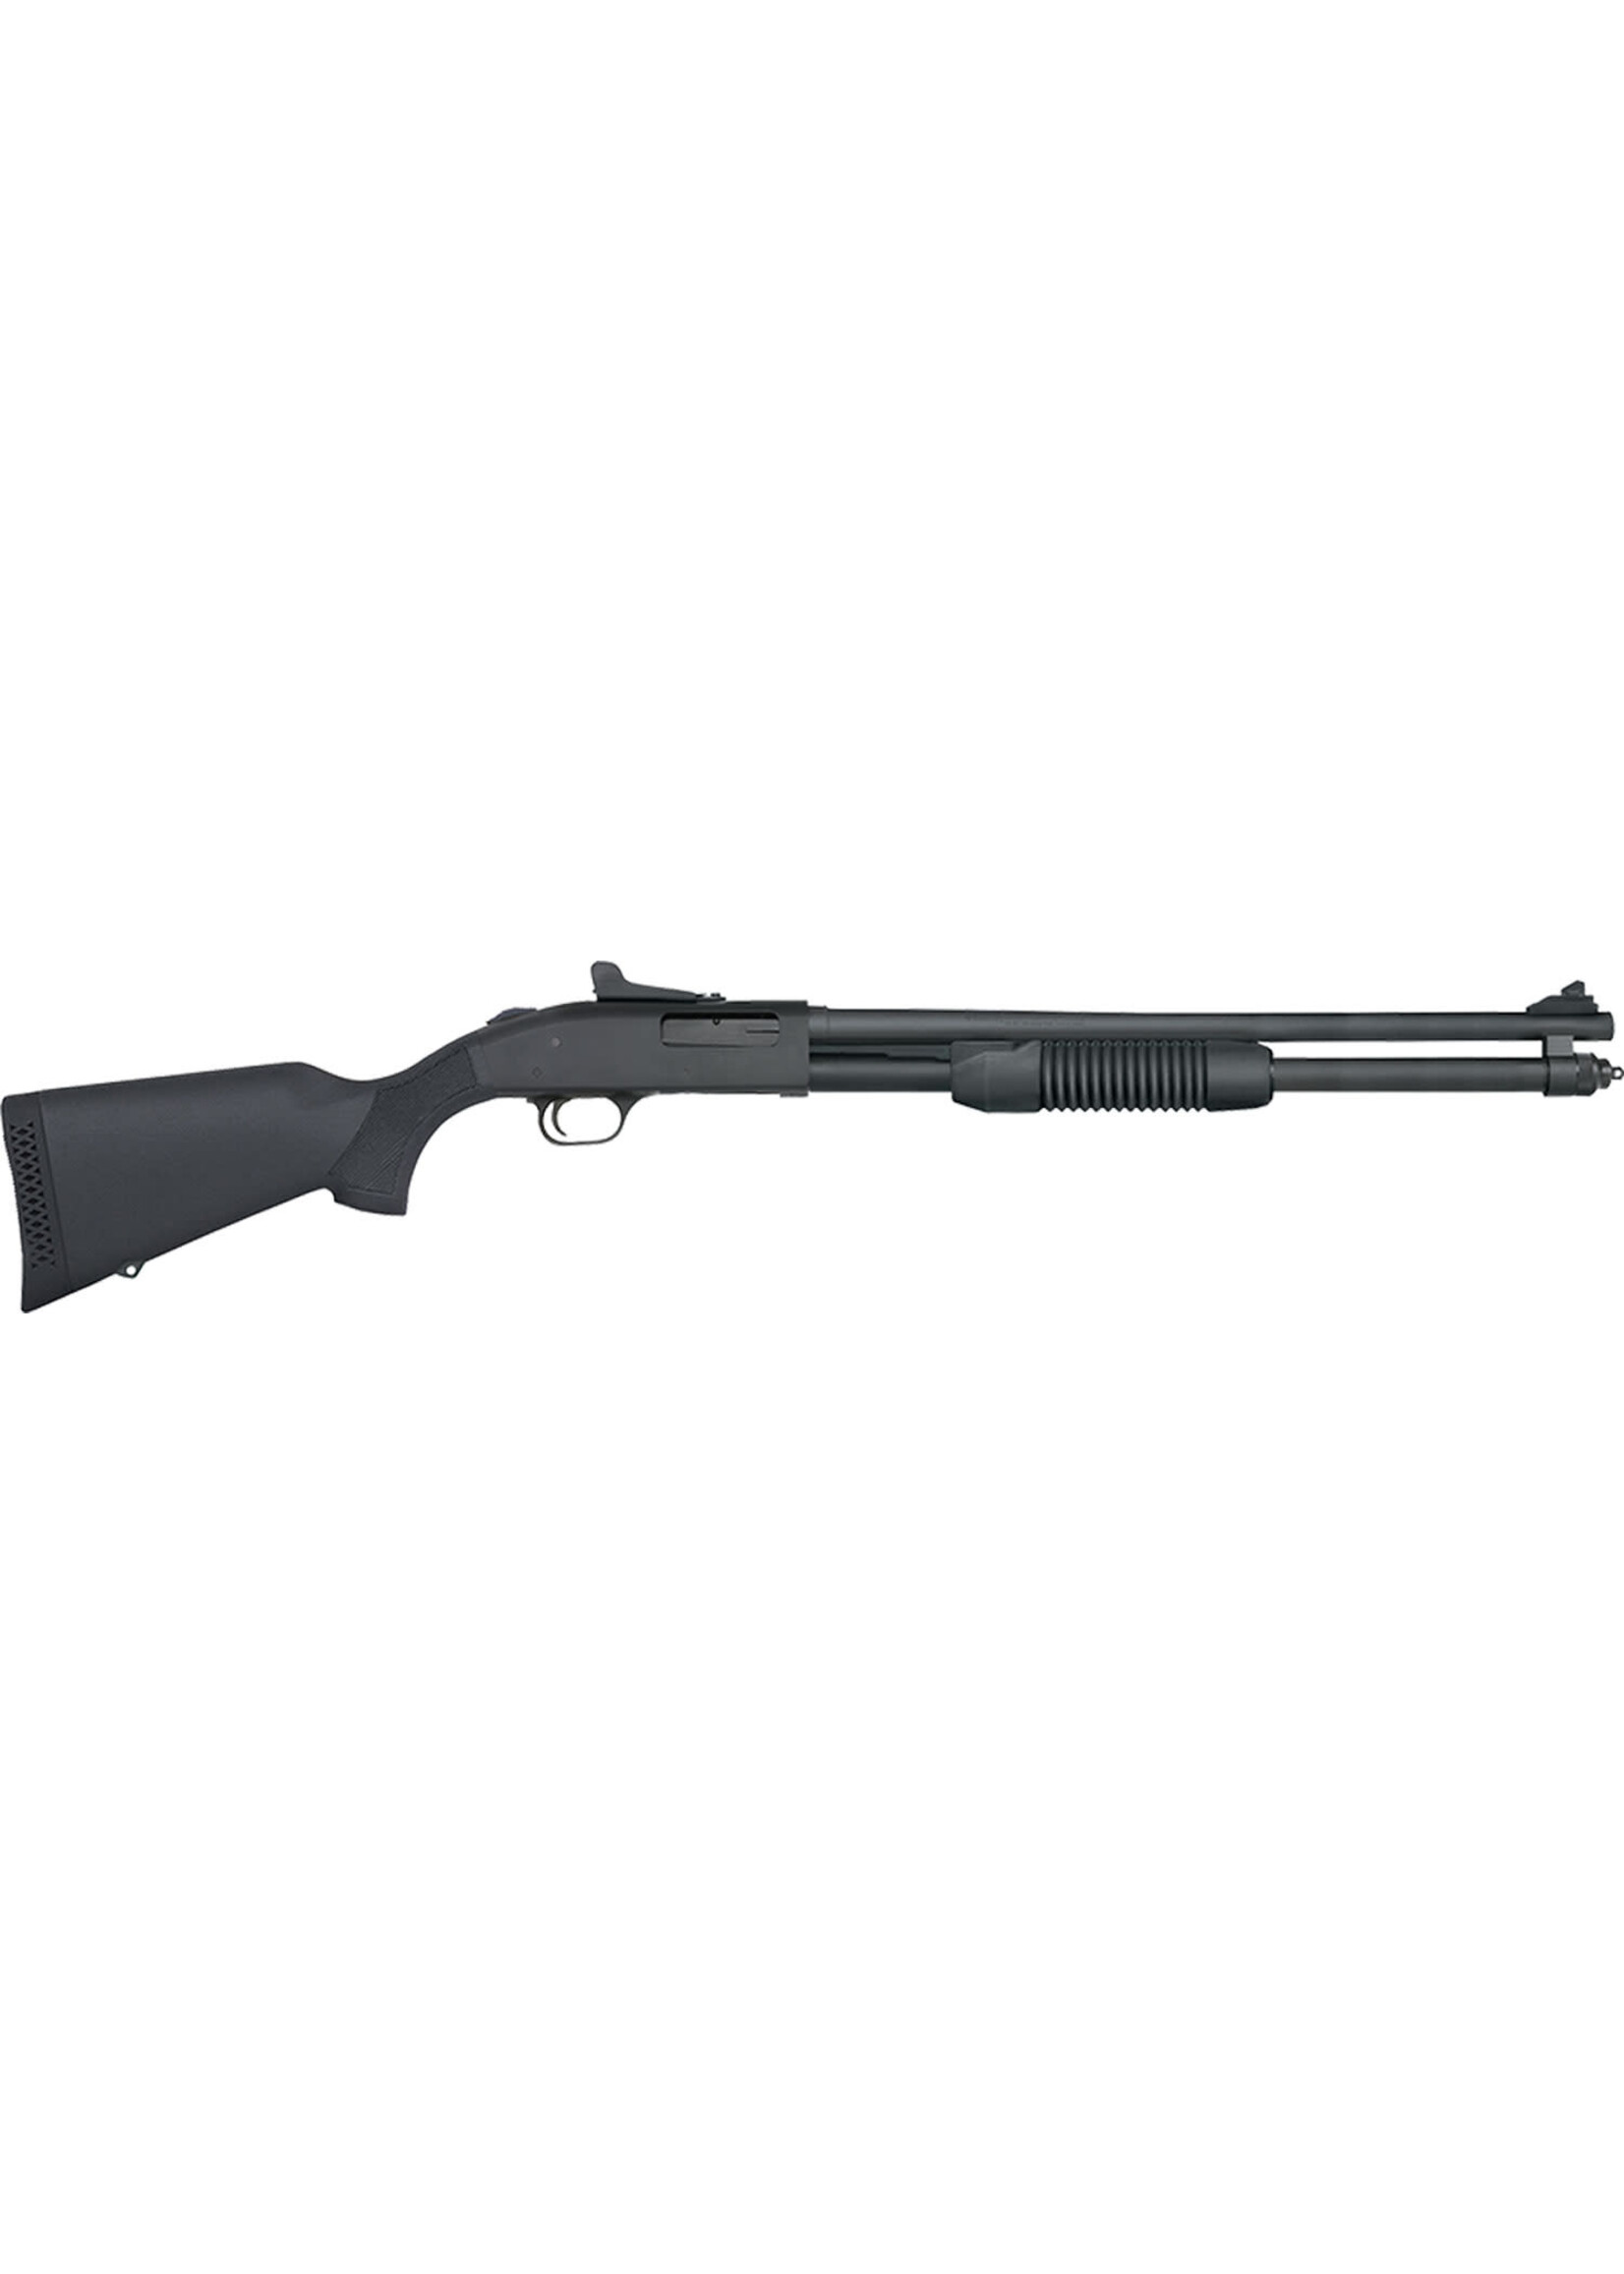 Mossberg Mossberg 50699 590 Persuader 20 Gauge 8+1 3" 20" Cylinder Bore Barrel, Matte Blued Metal Finish, Drilled & Tapped Receiver, Ghost Ring Sight, Synthetic Stock